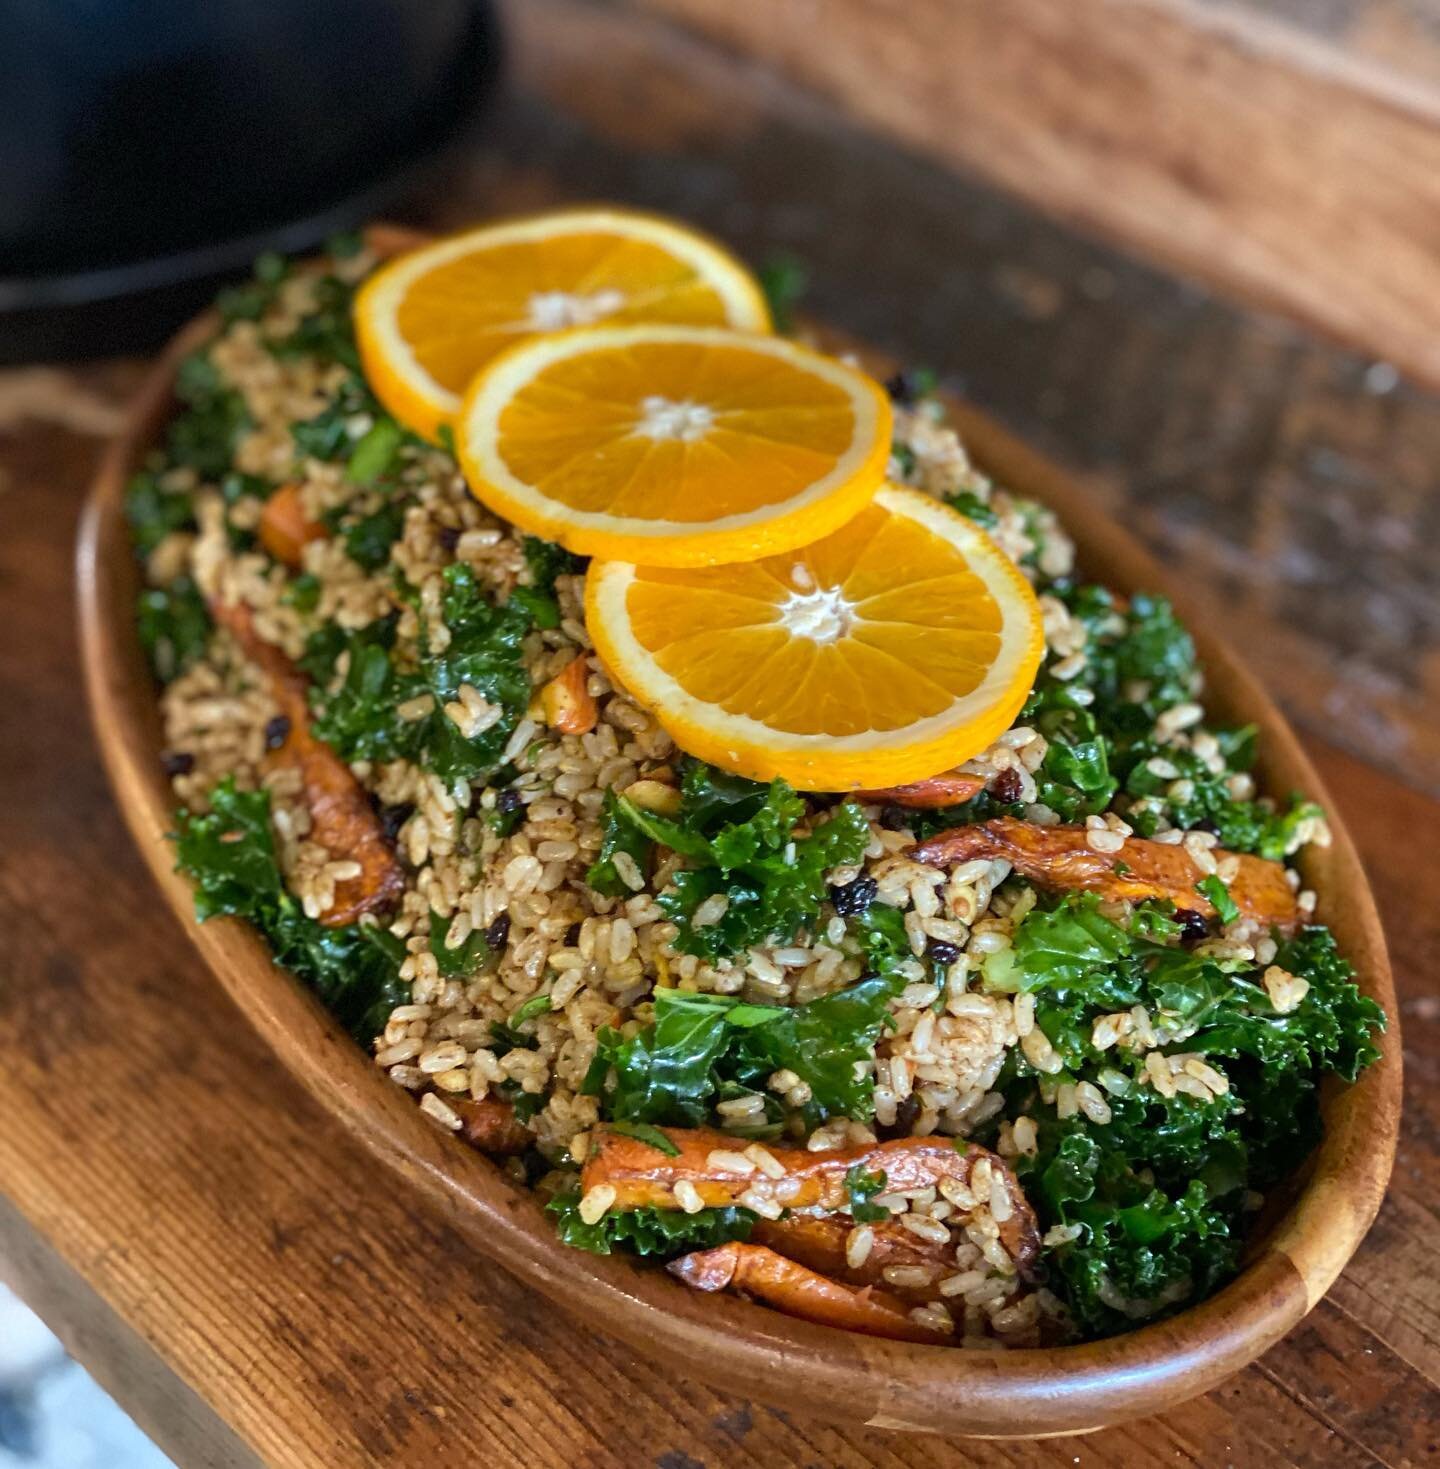 Today&rsquo;s fresh salad&hellip; brown rice with spiced carrot, kale, currants, tamari almonds, herbs and a zesty orange dressing.